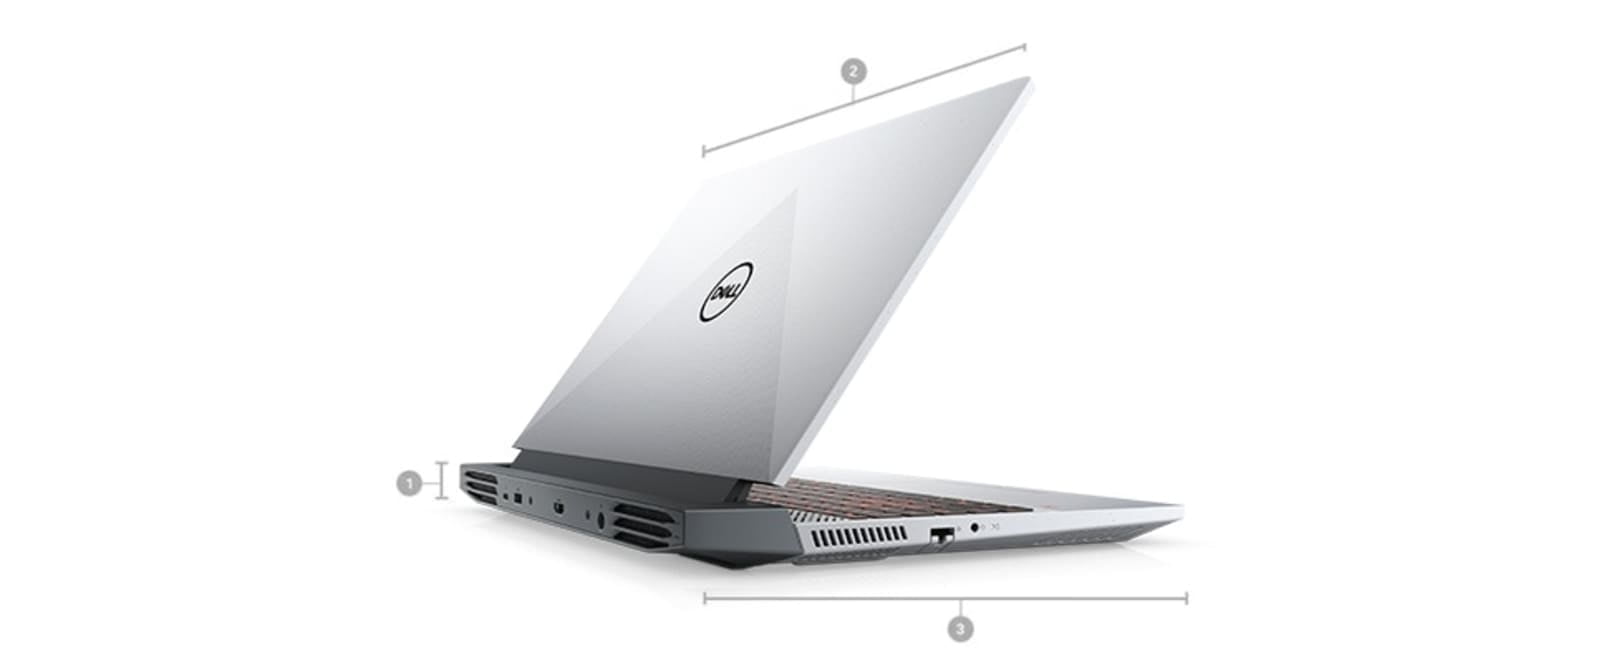 Dell G15 2021 – Not short of incredible